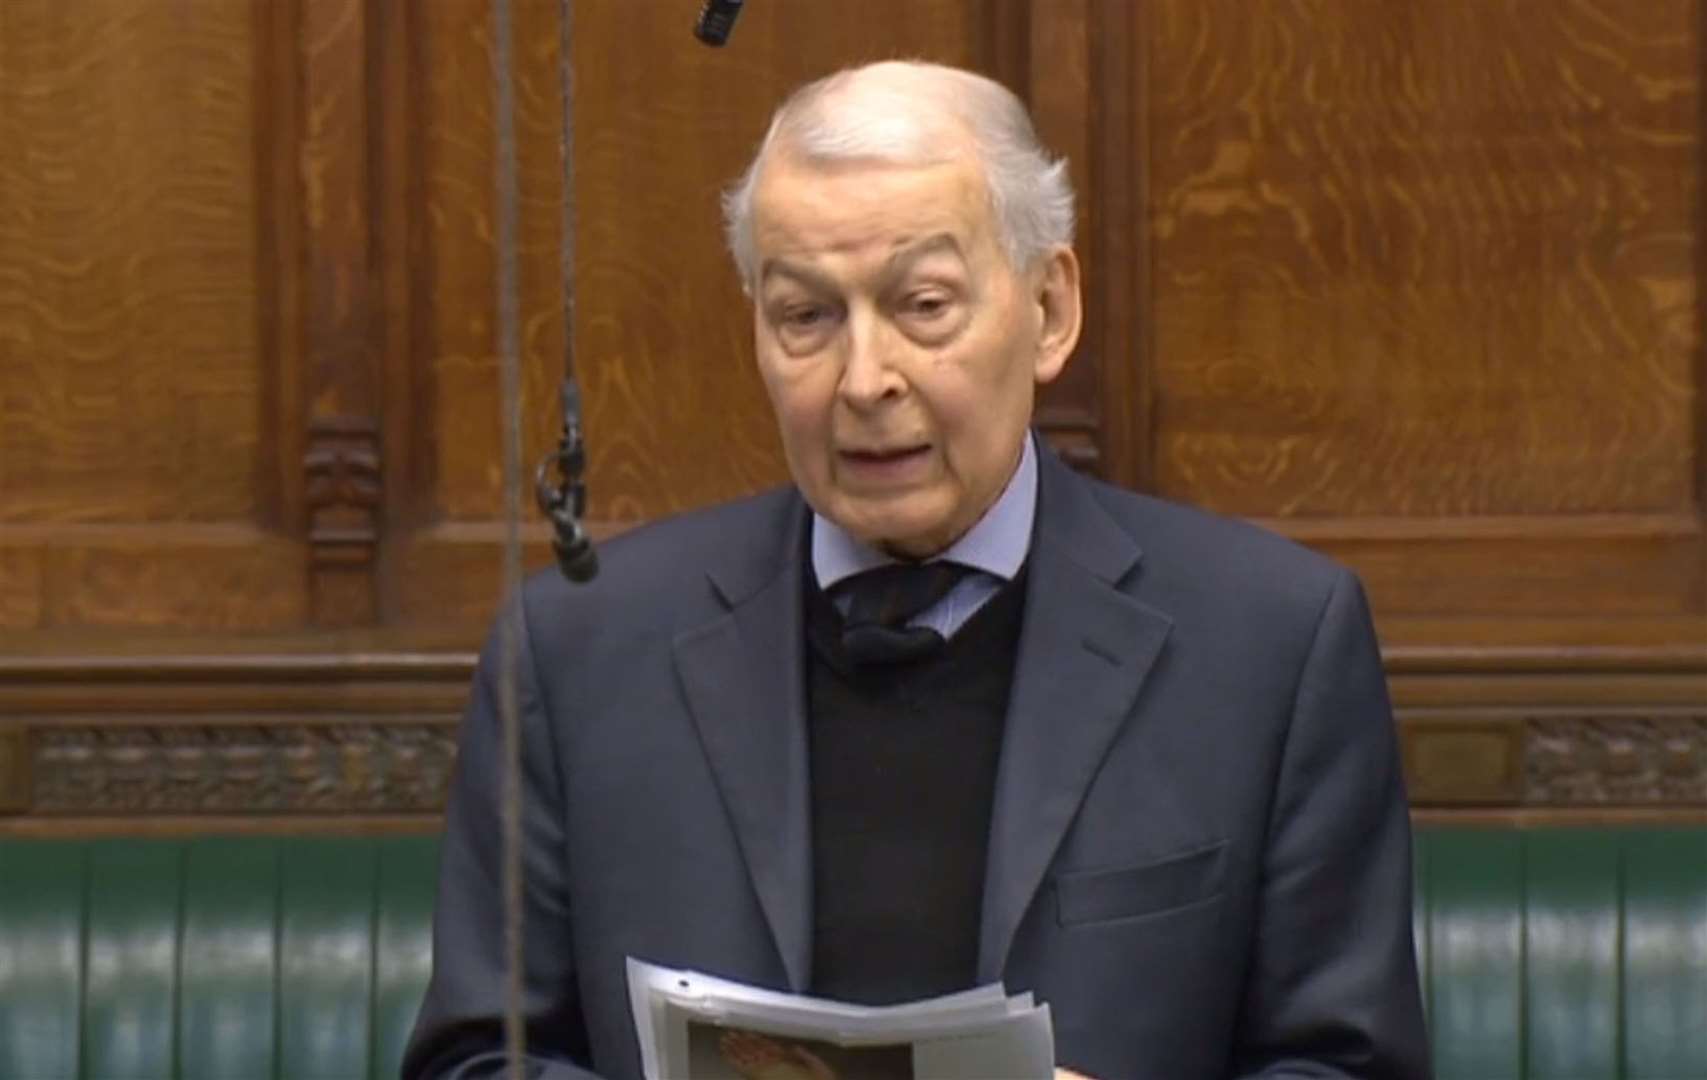 Labour MP Frank Field, then chairman of the Work and Pensions Committee, speaks in the House of Commons in October 2016 (PA)